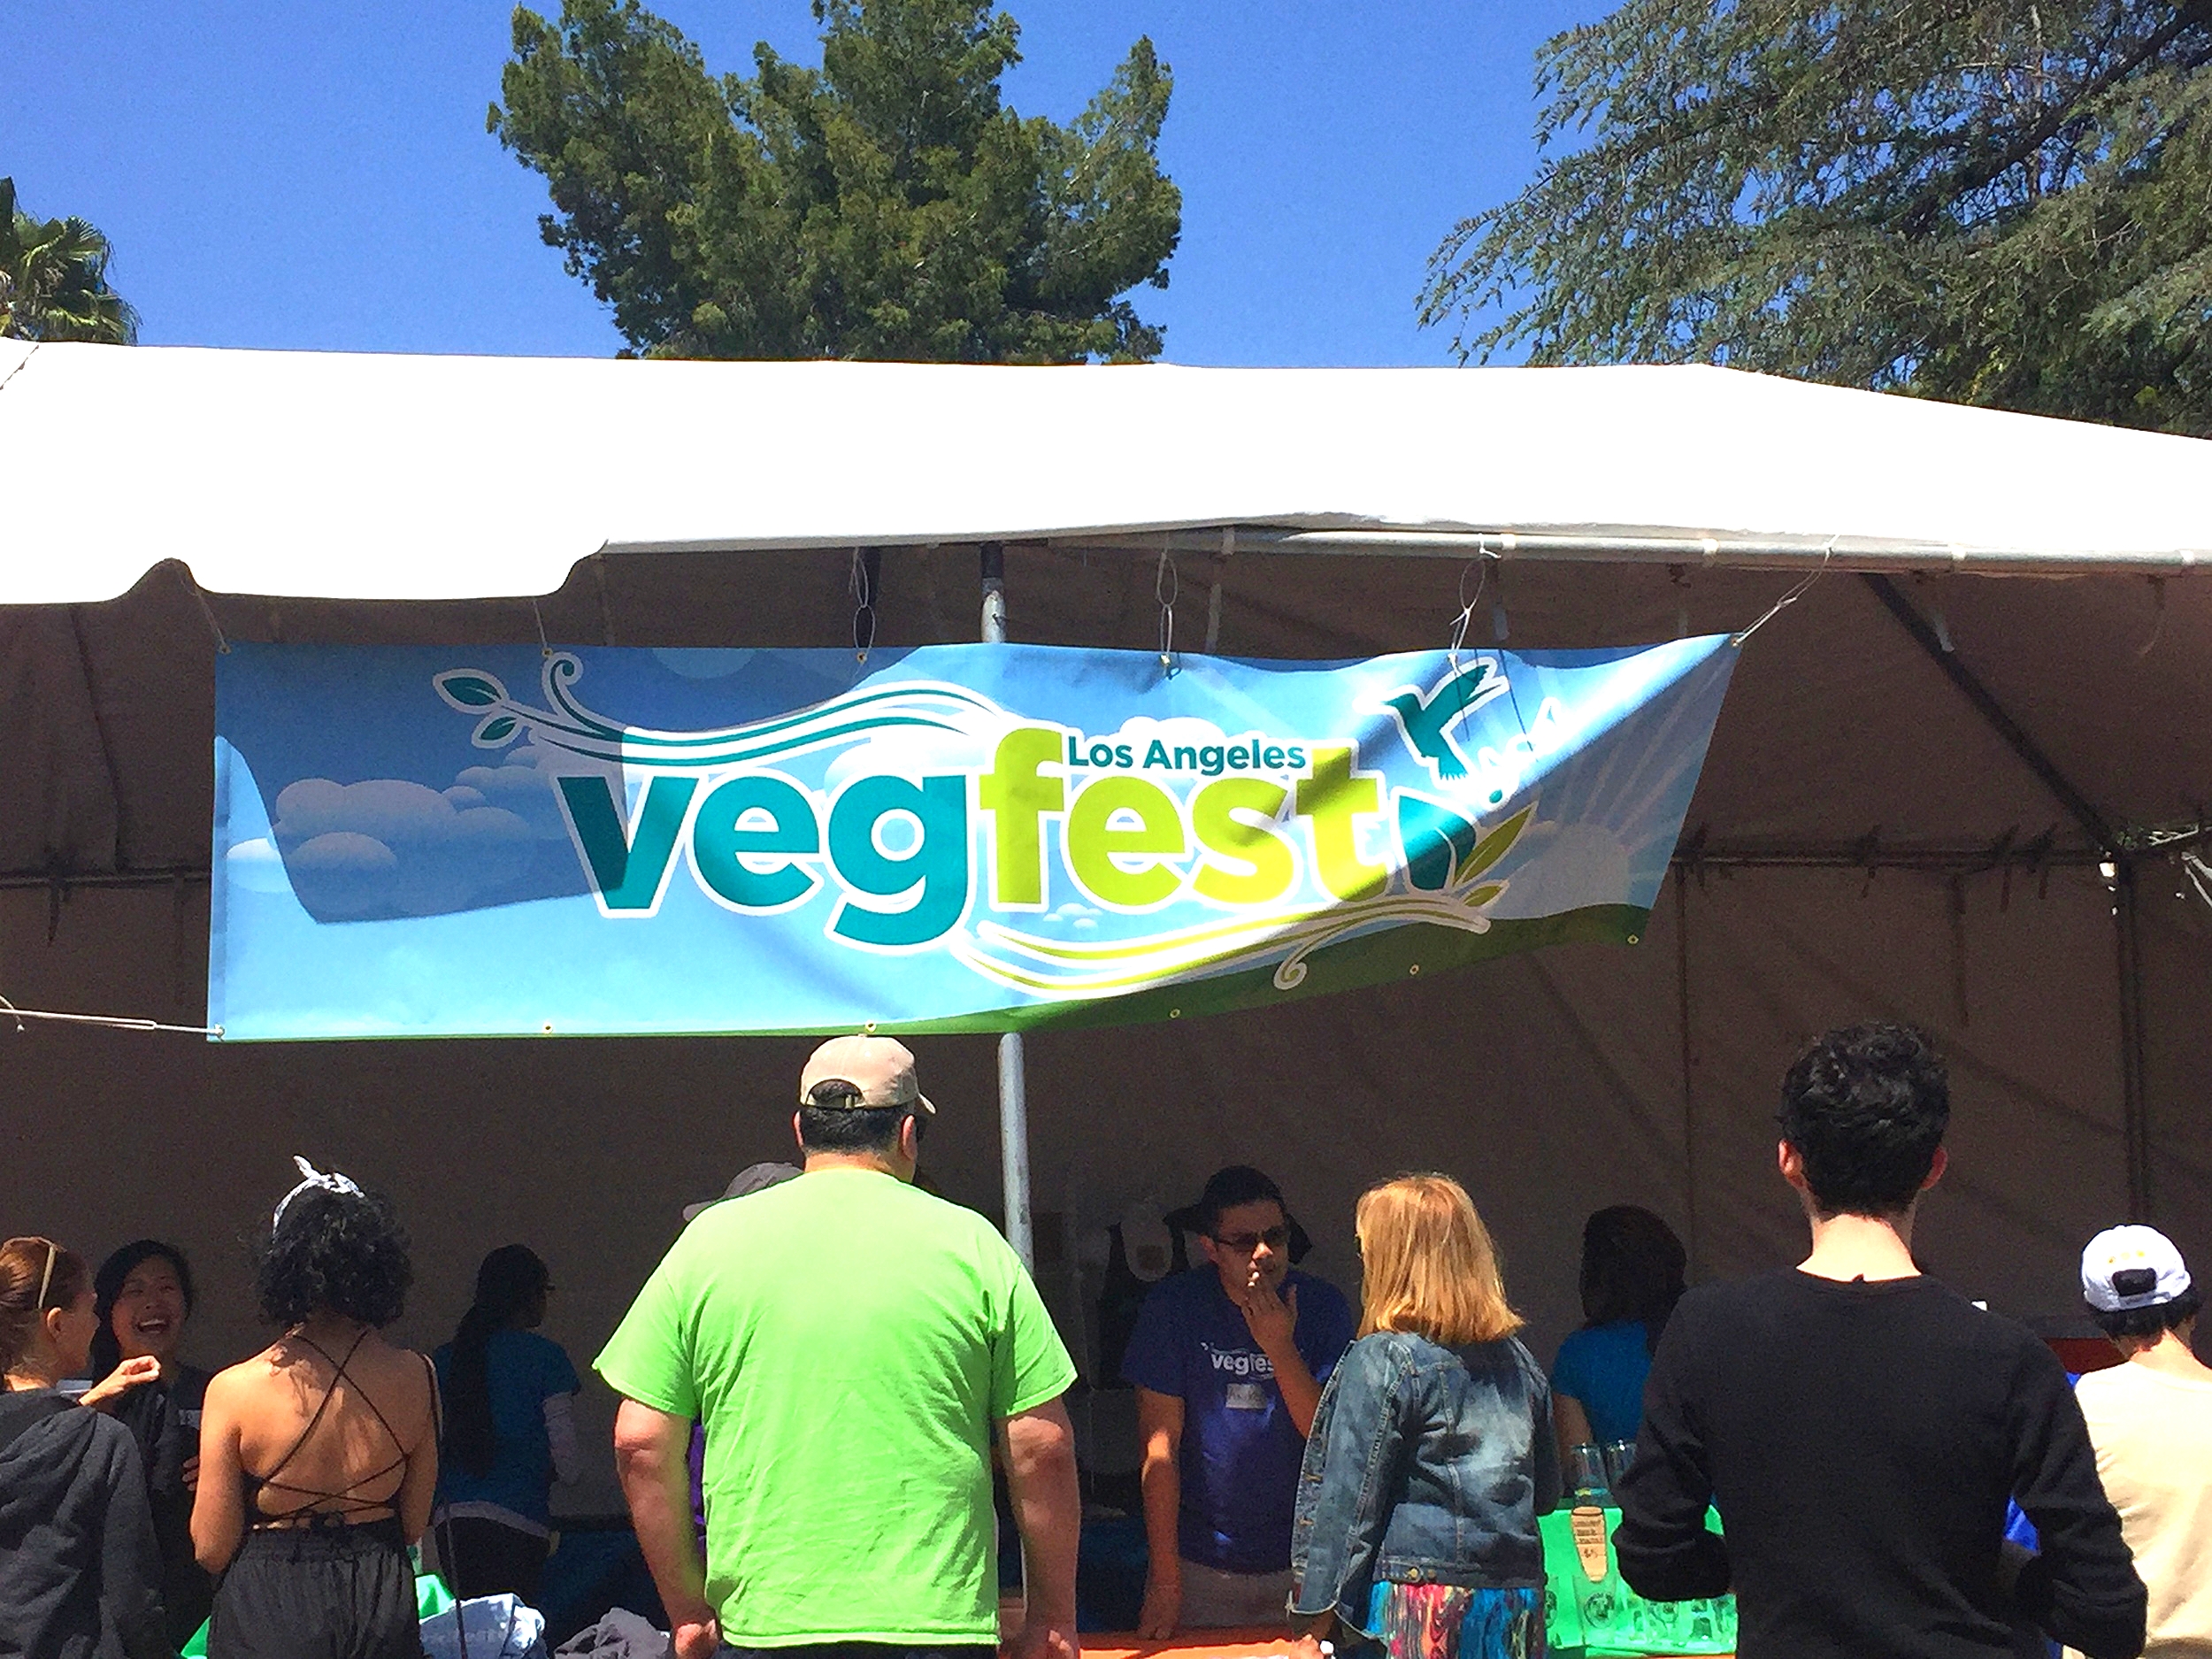 VegFest LA Info and Merchandise Booth